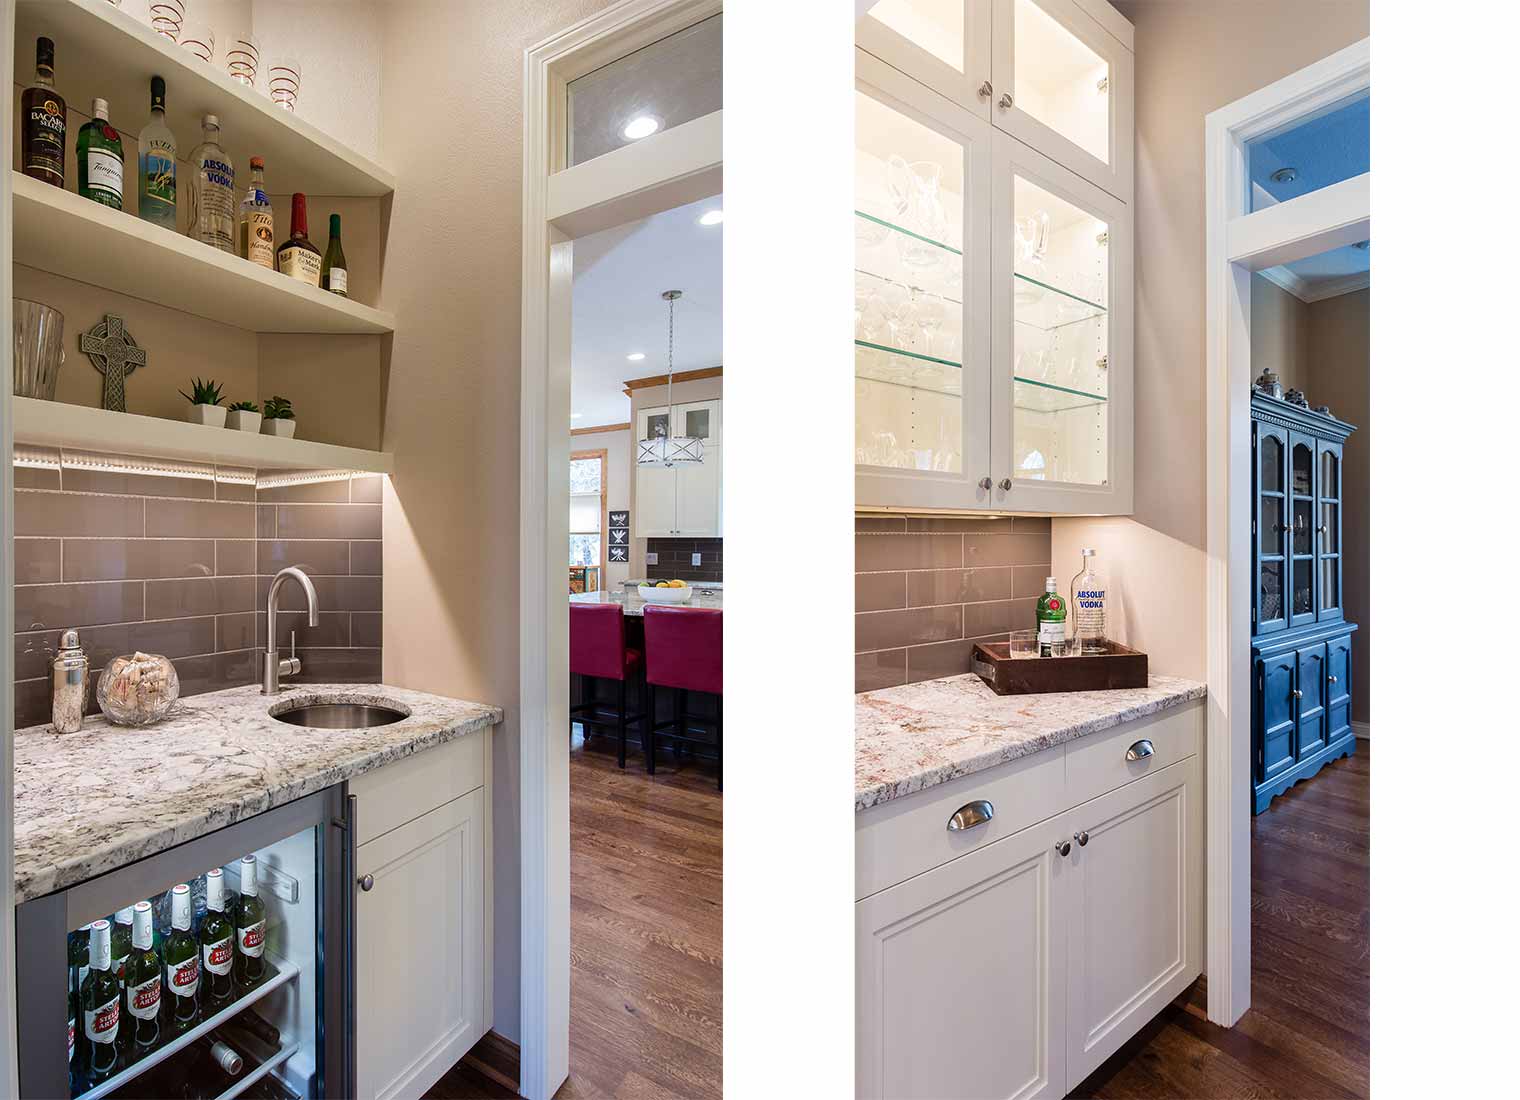 Butlers pantry in two views with bar sink, wine fridge adjacent to kitchen remodeled by Silent Rivers